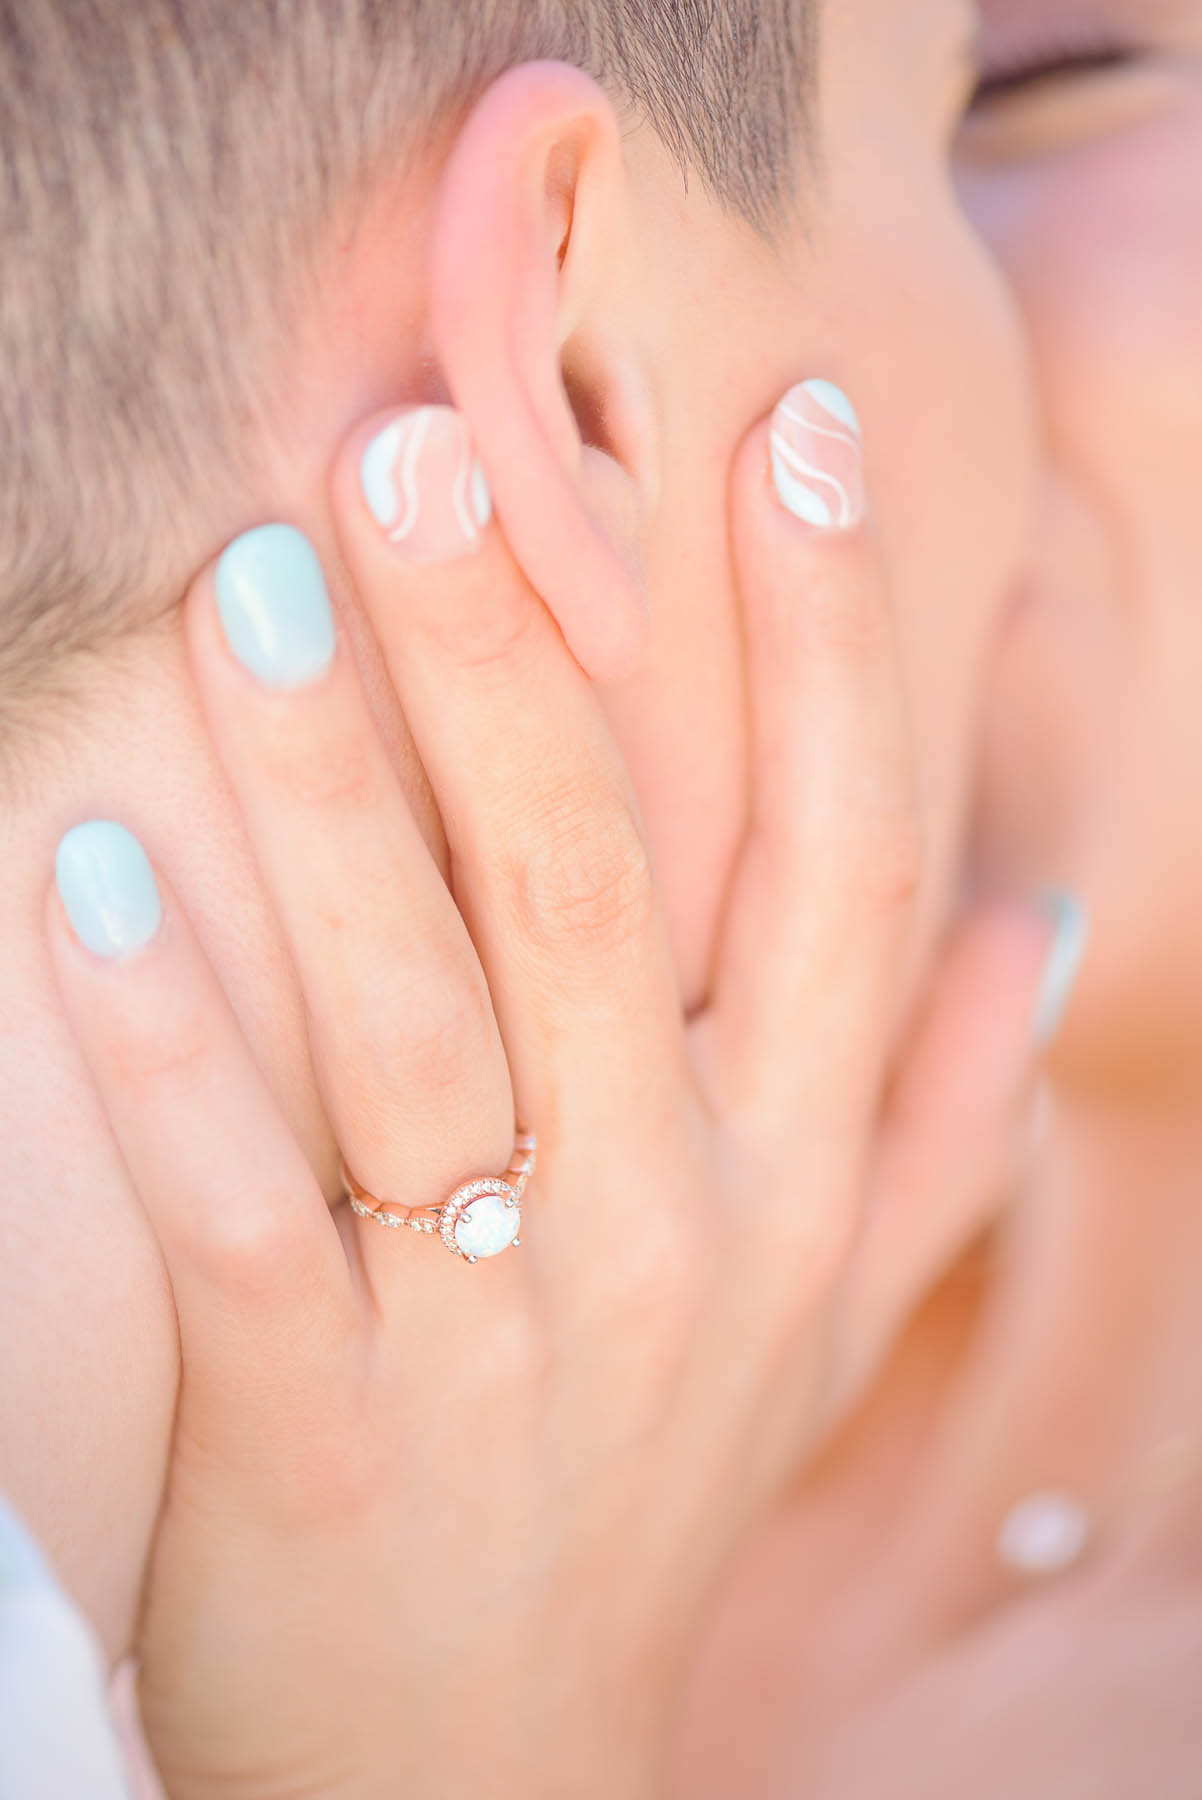 A close up oftwo white people kissing, with one's hand on the other's cheek. They are showing off a rose gold ring with an opal setting.